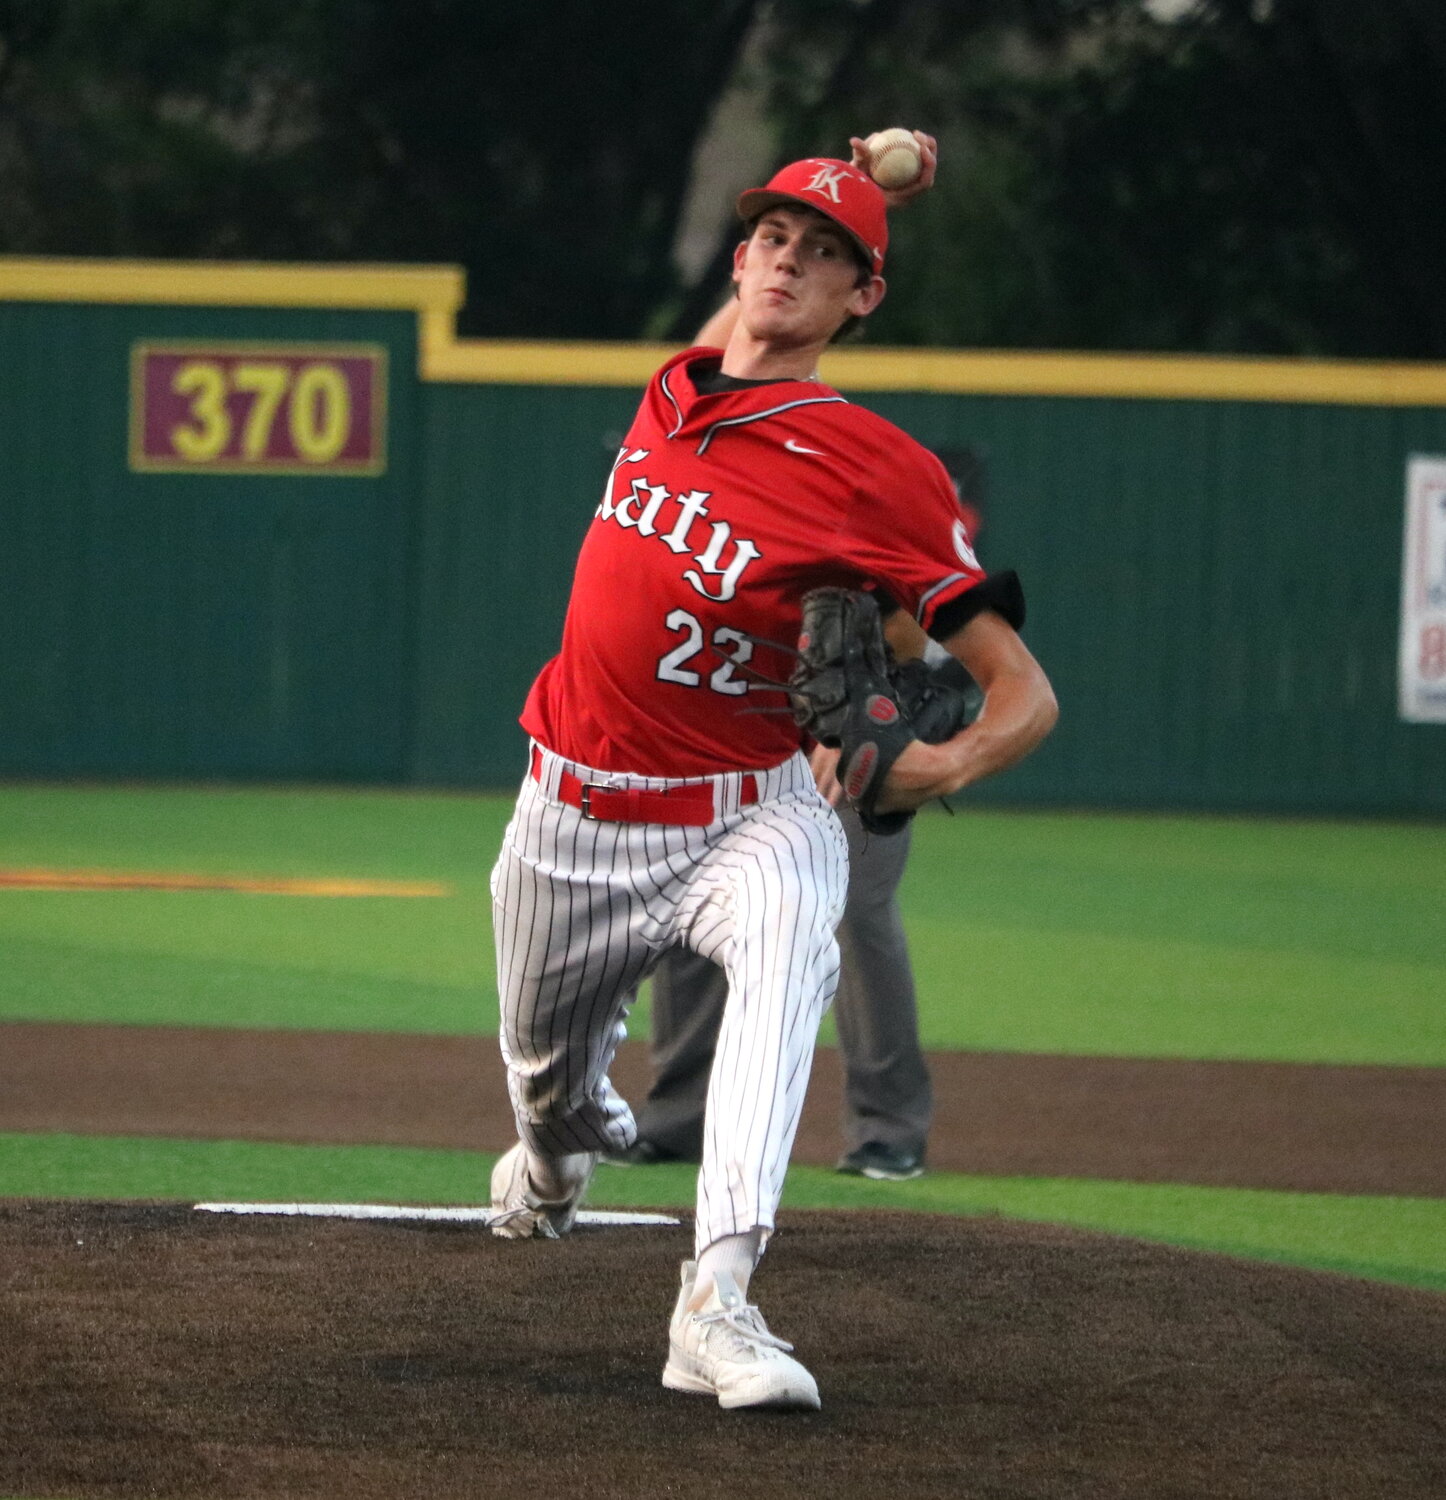 Cade Nelson pitches during Wednesday's Regional Semifinal between Katy and Clear Springs at Deer Park.